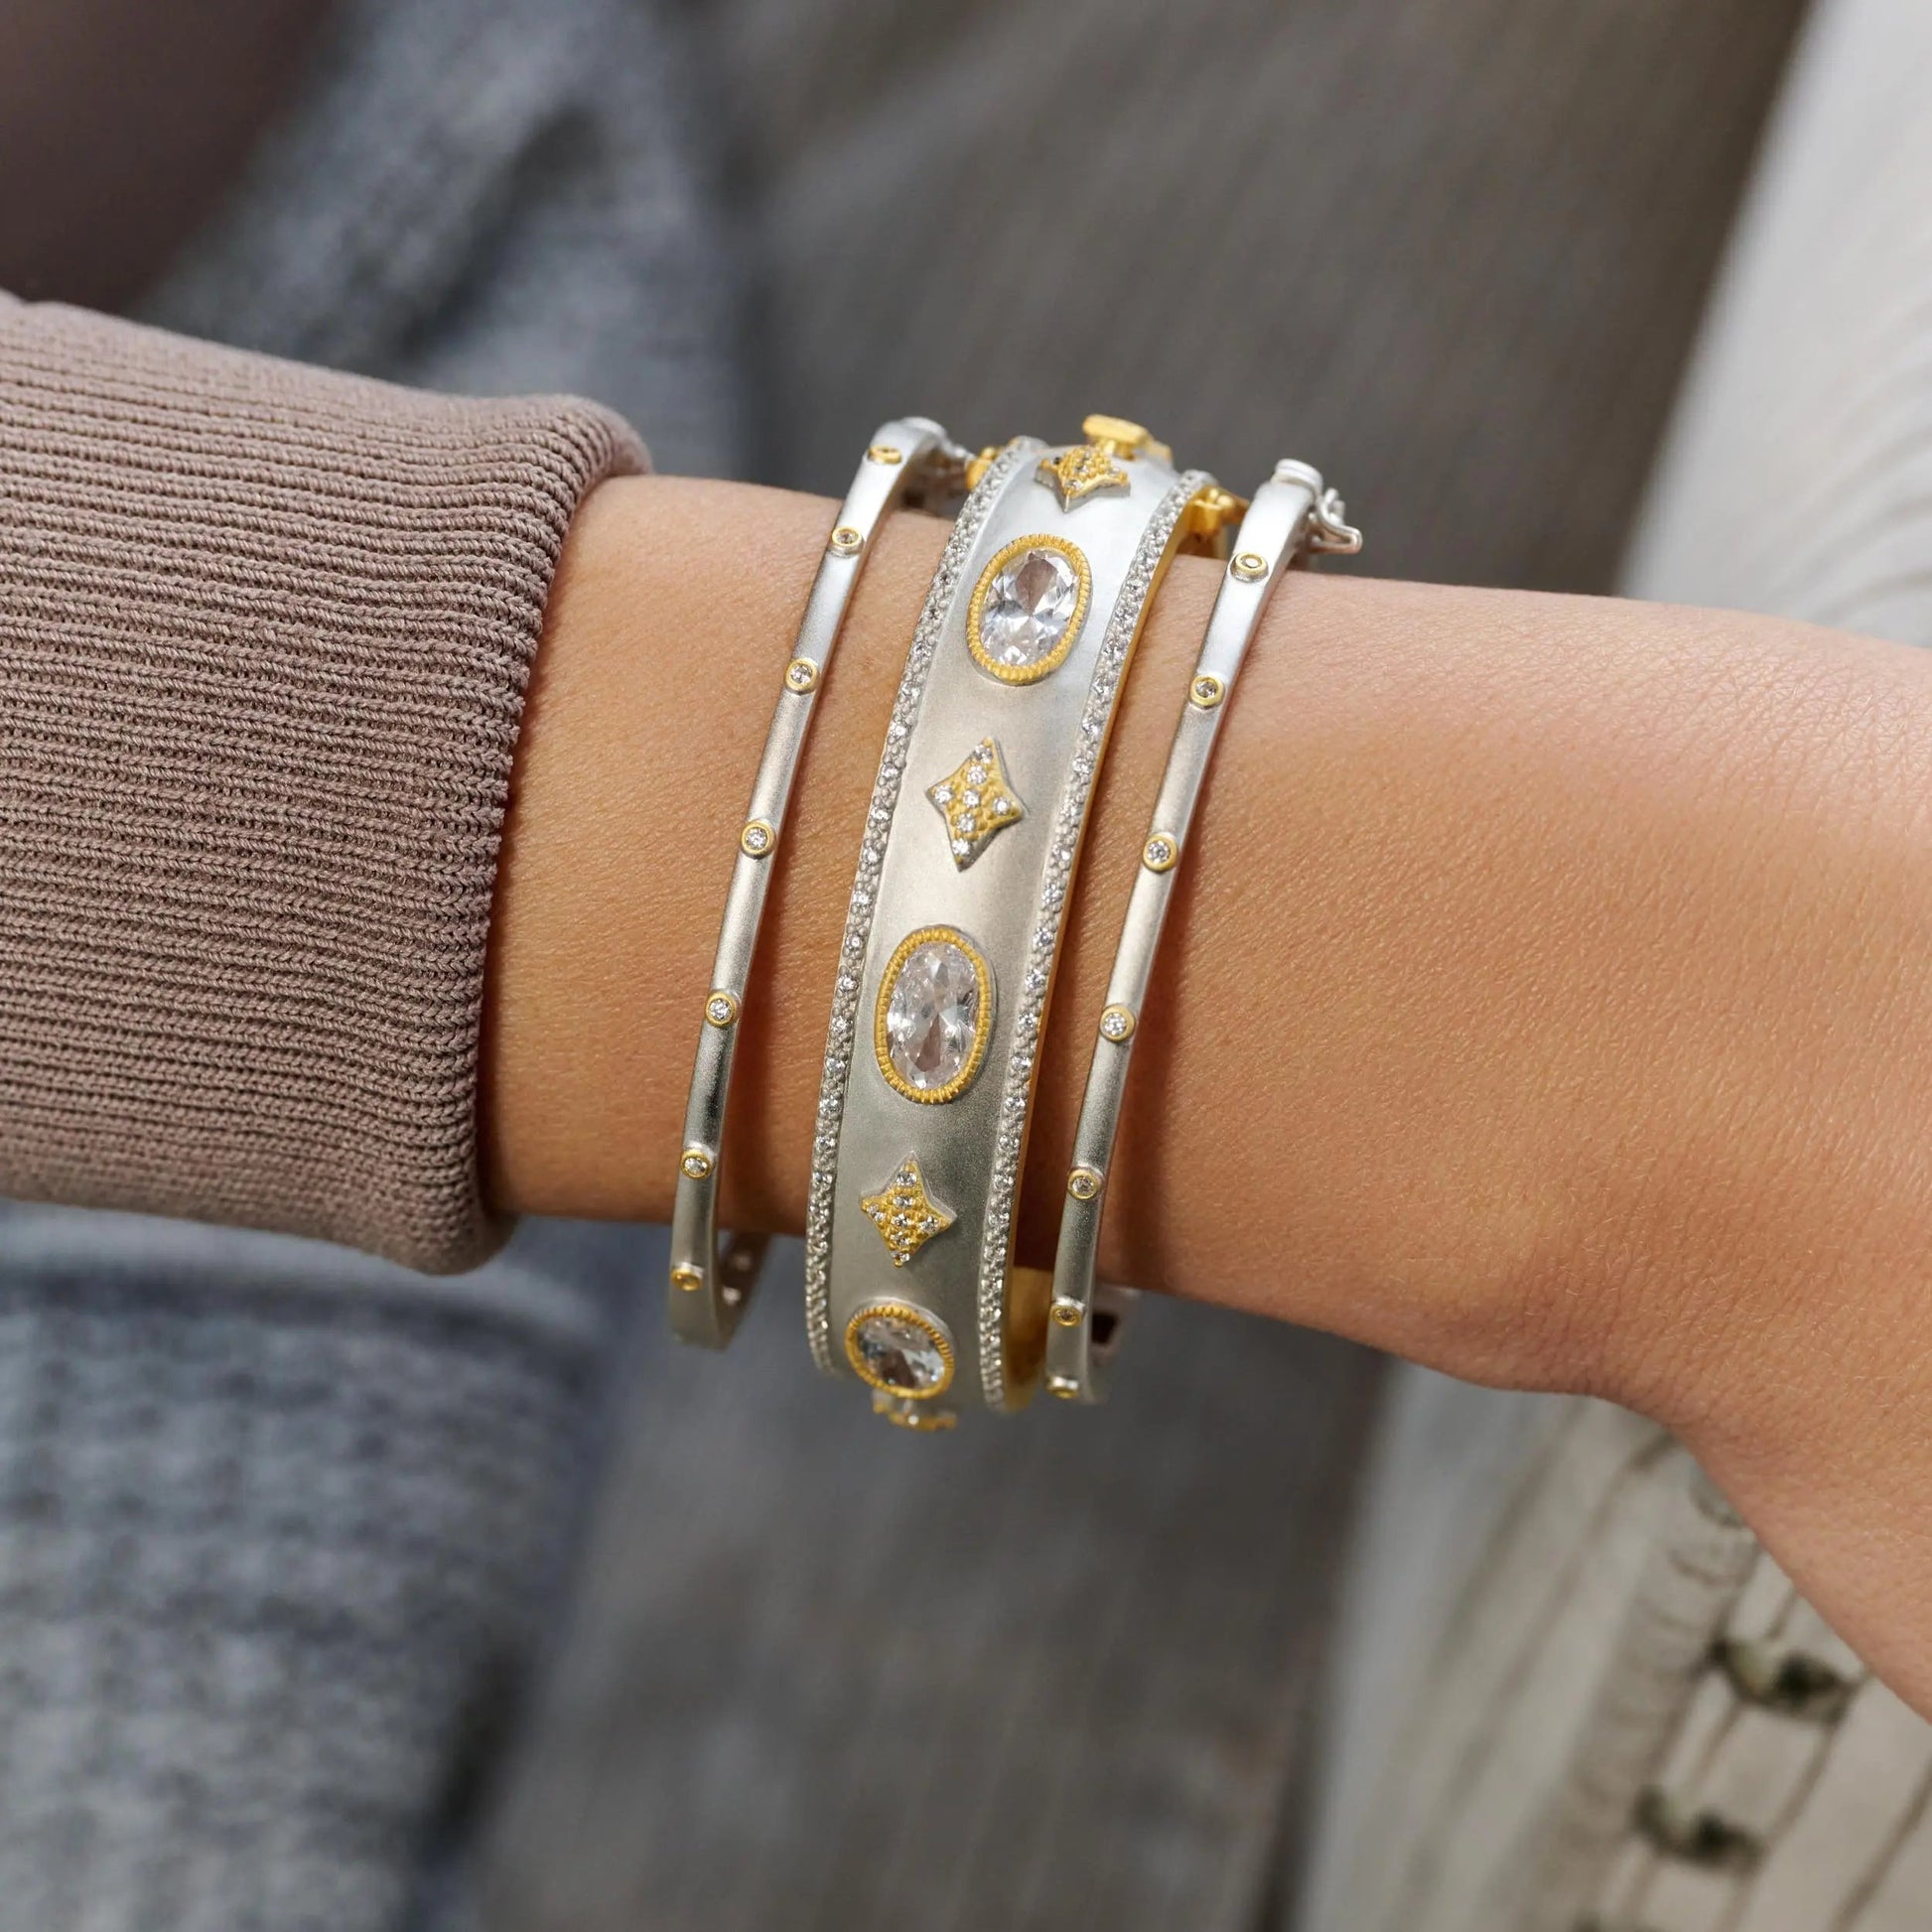  Grit to Gorgeous Stack Shop the Look SHOP THE LOOK